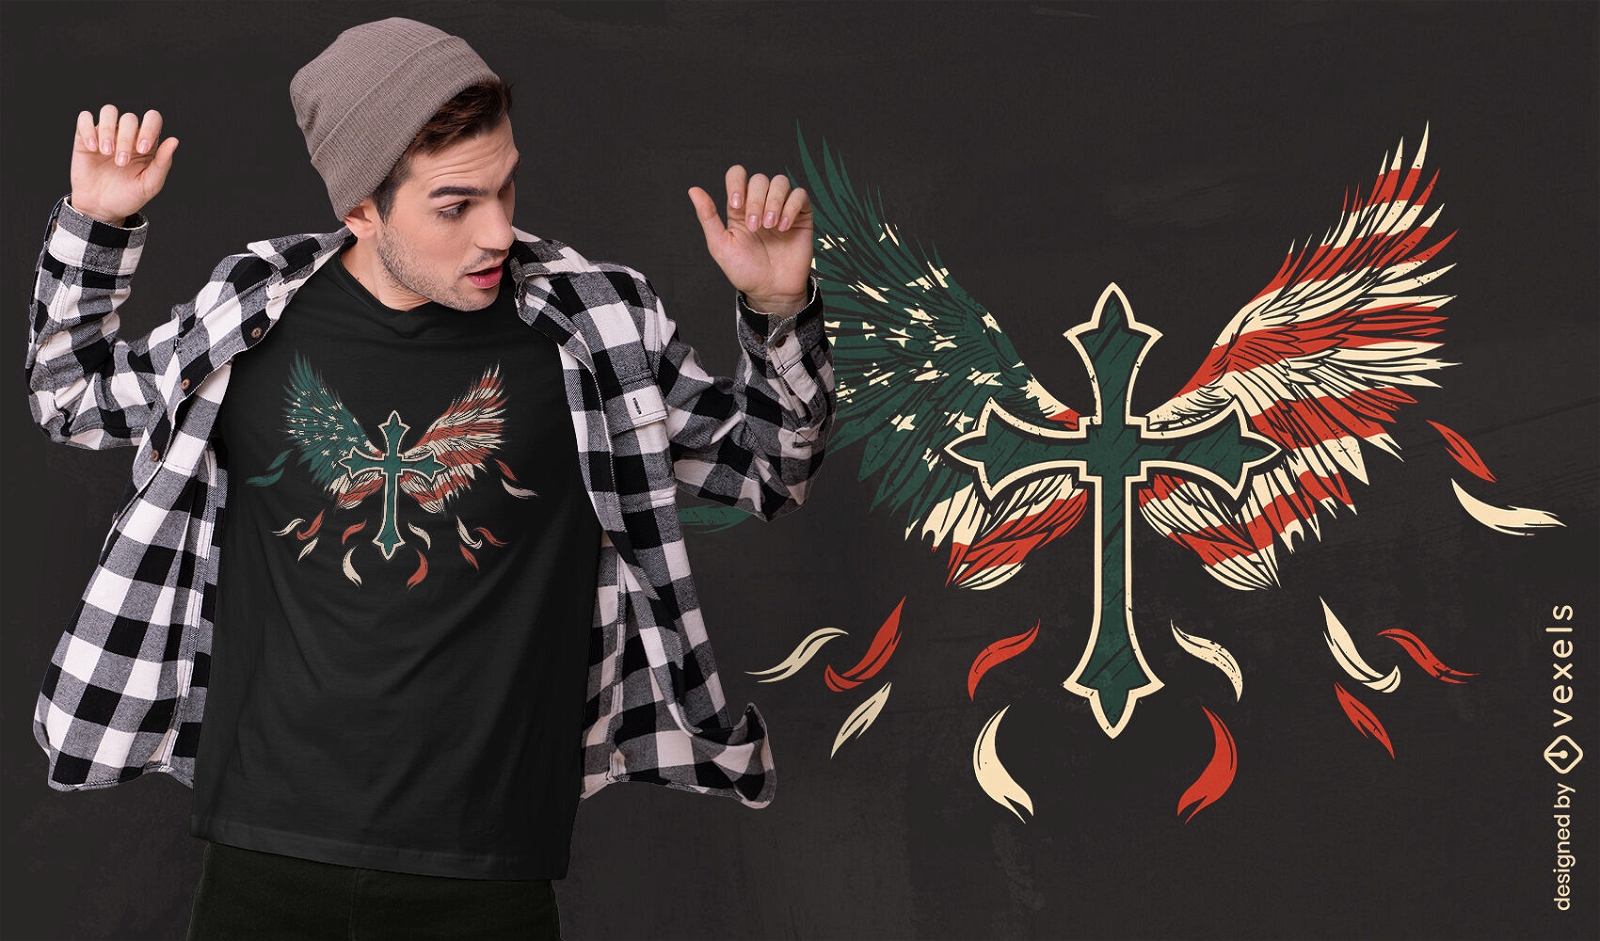 USA wings and cross t-shirt design